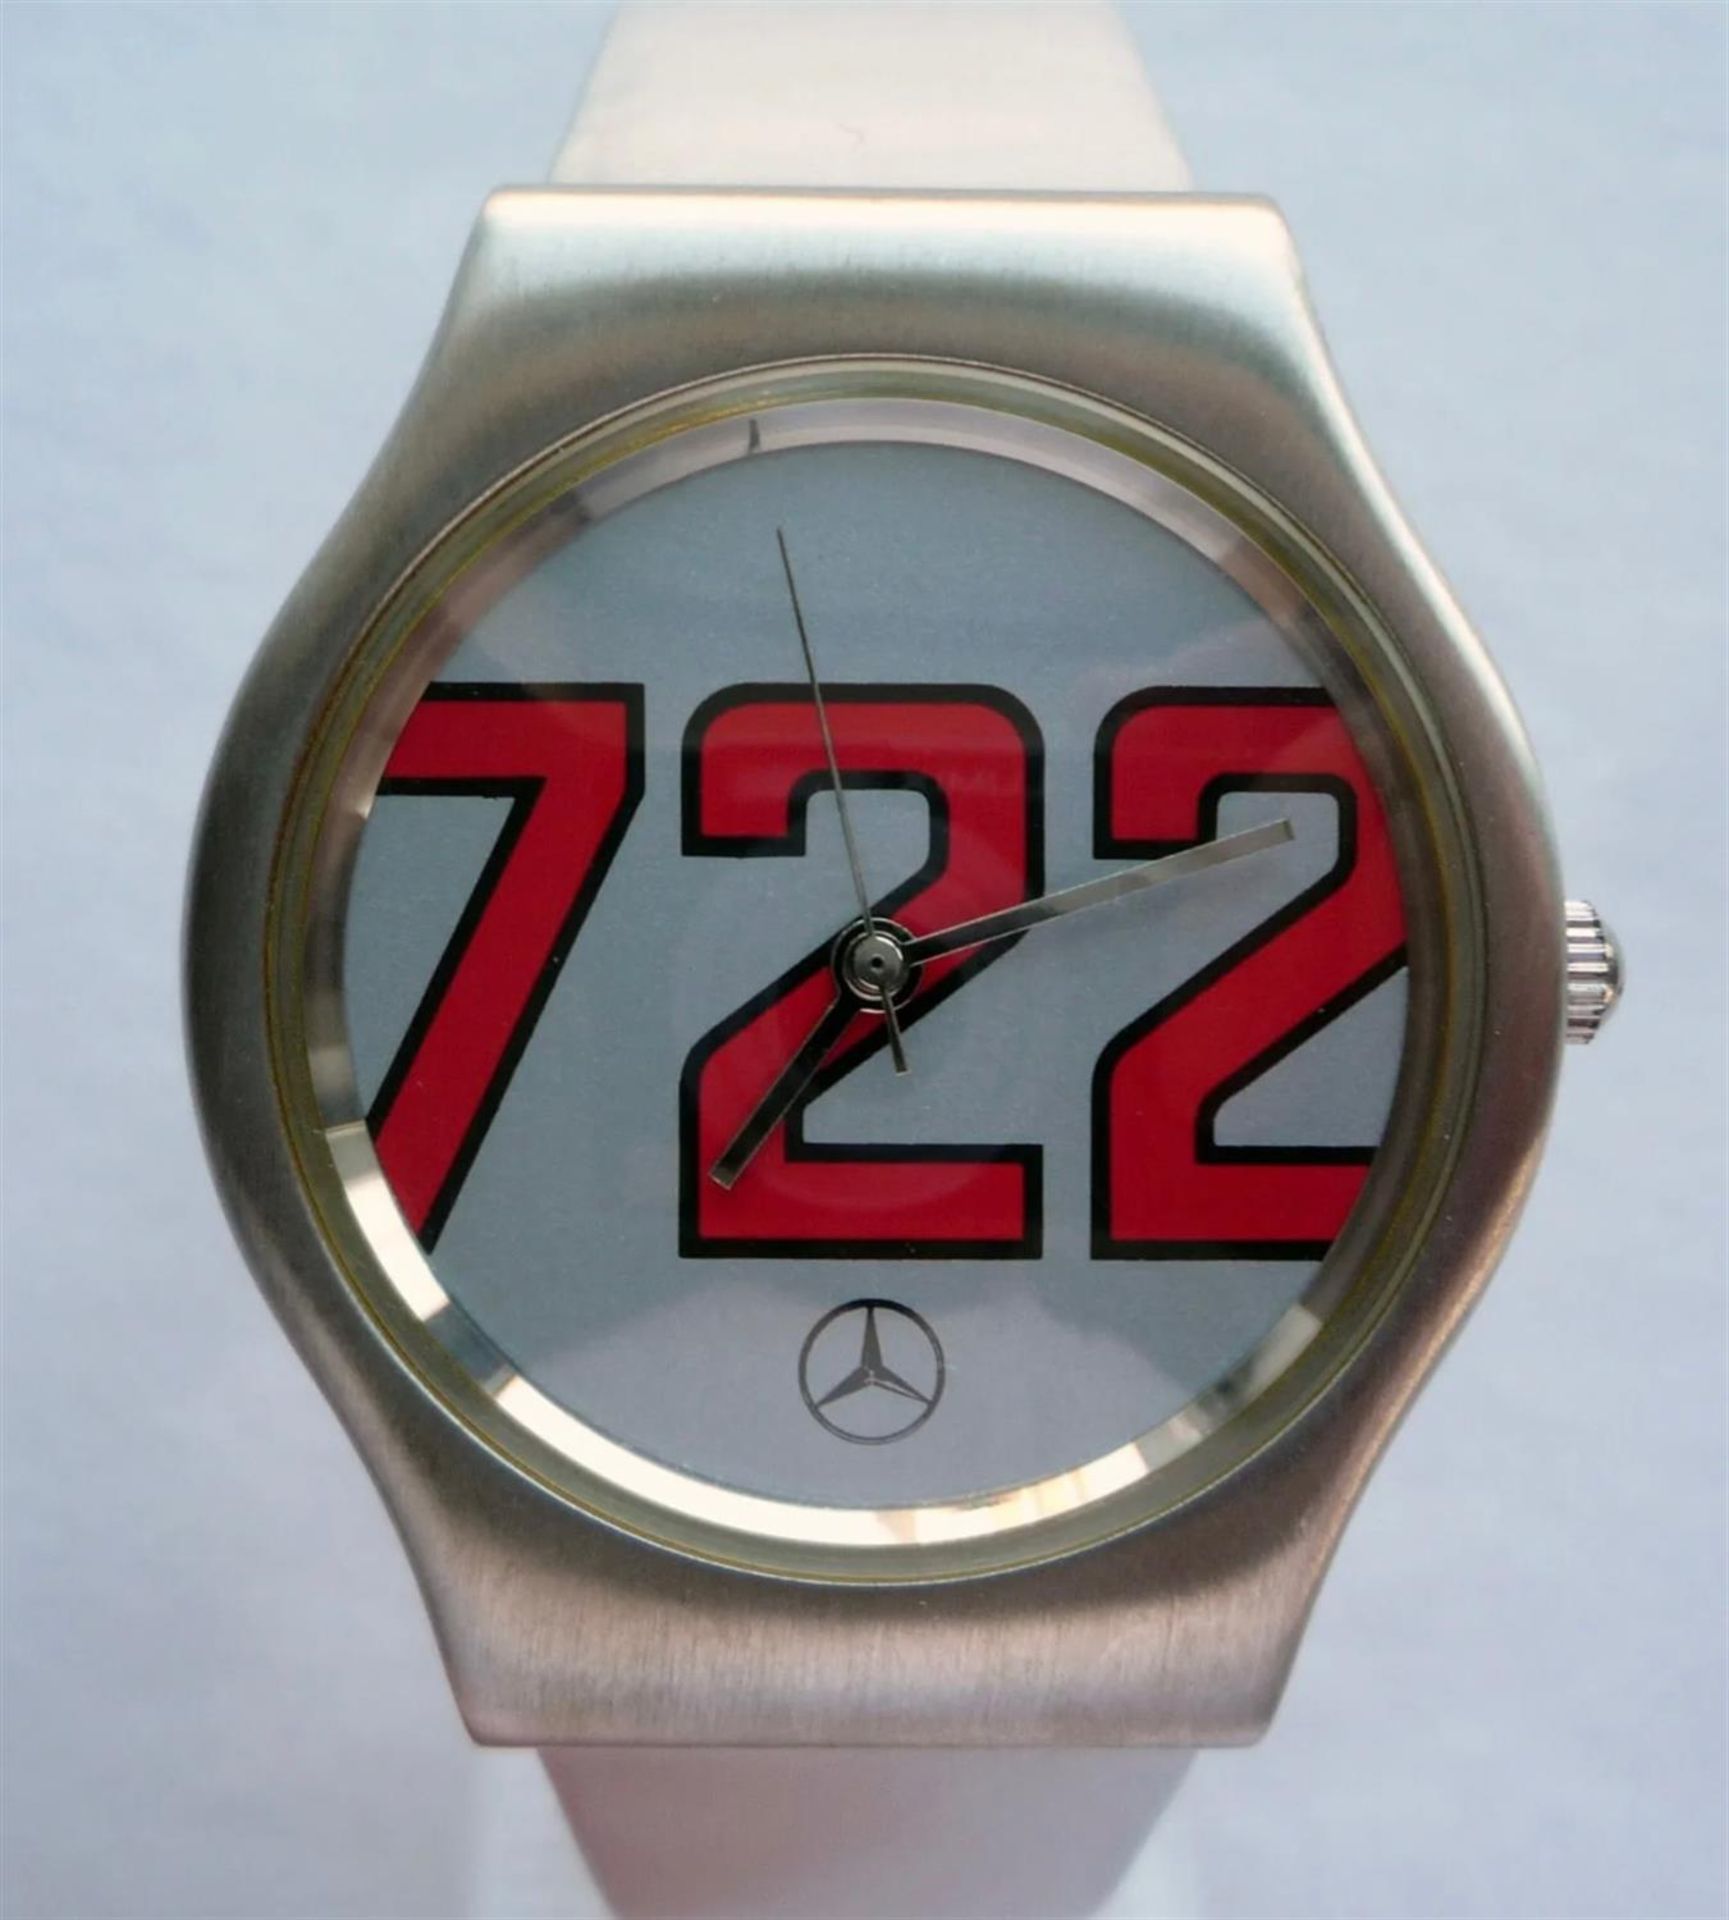 A Rare and Genuine Mercedes-Benz 722 Mille Miglia Classic Racing Watch - Image 7 of 10